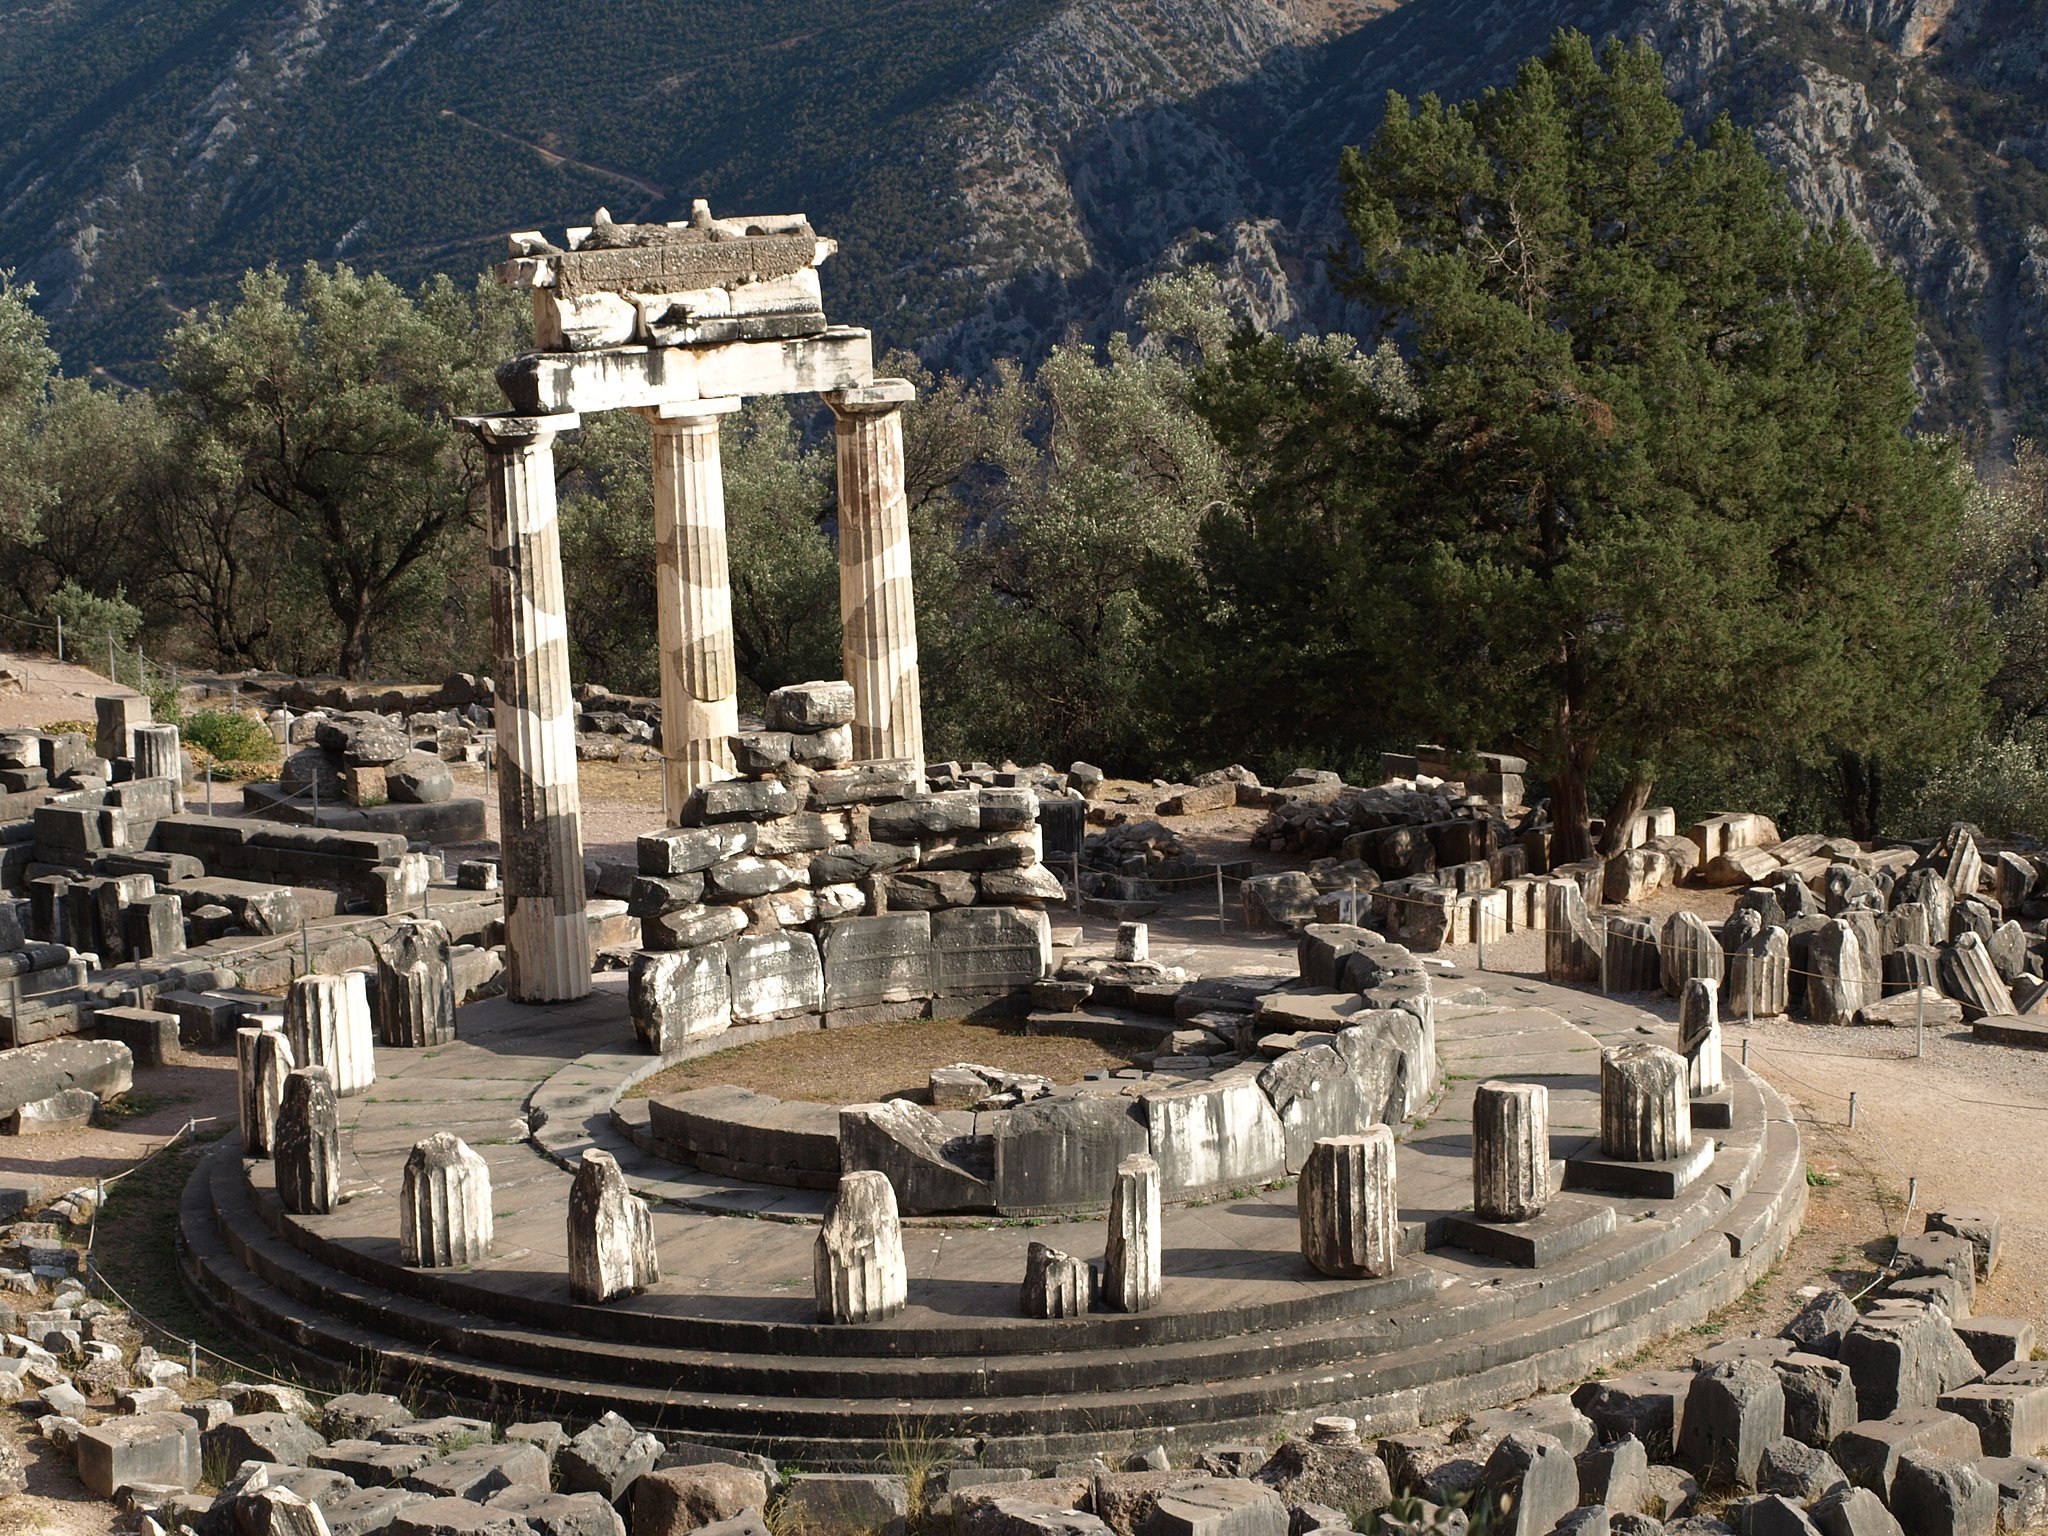 Stone archaeological remains, with reconstructed portions, of the Athena pronaia. The temple comprises a circular inner chamber with a circle of columns around it, three of which are reconstructed.